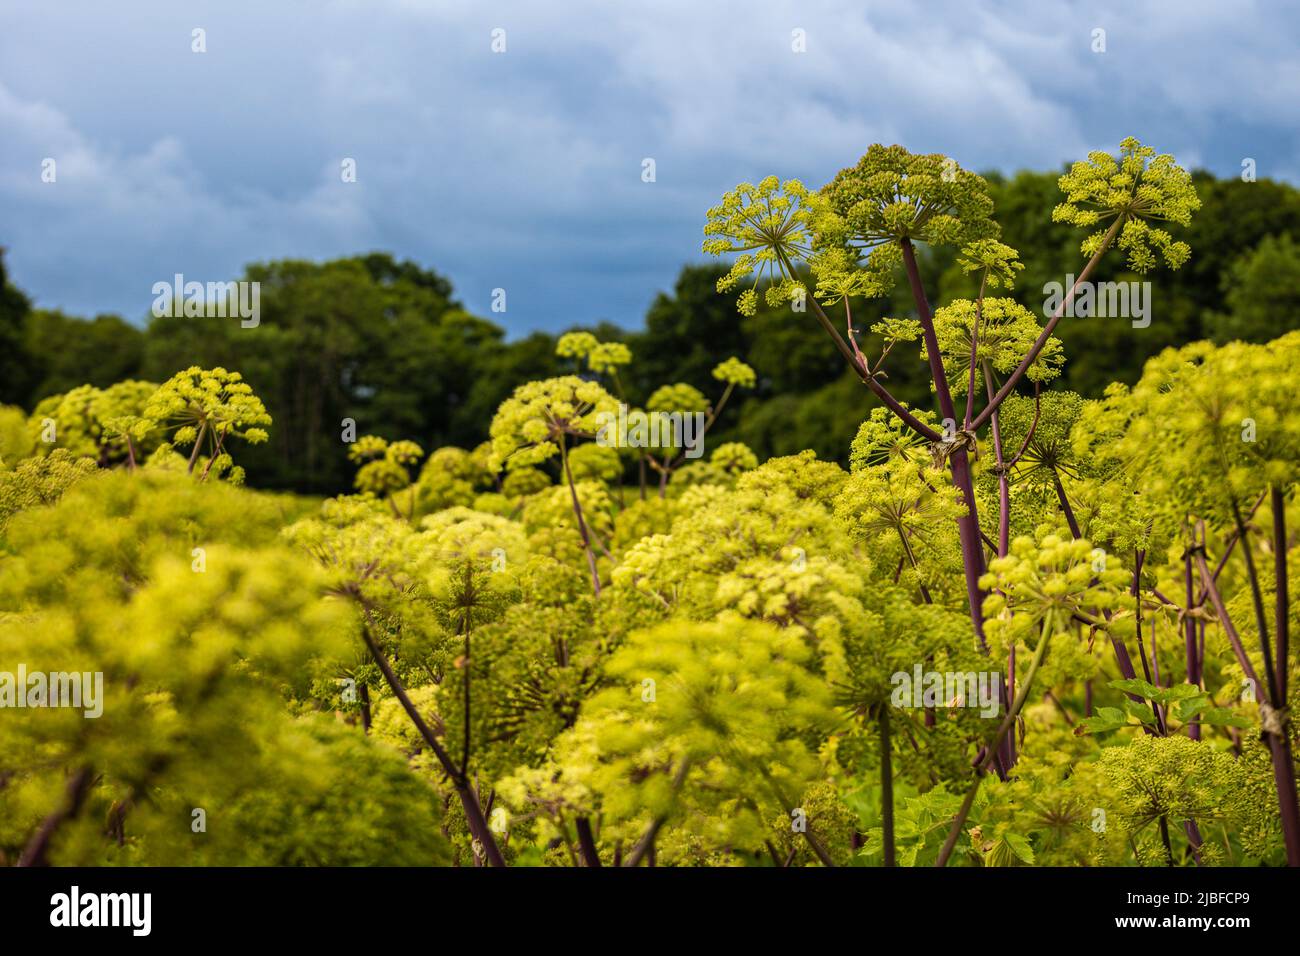 Crops growing in a field on Brenda Parker way walking trail, Hampshire, United Kingdom Stock Photo